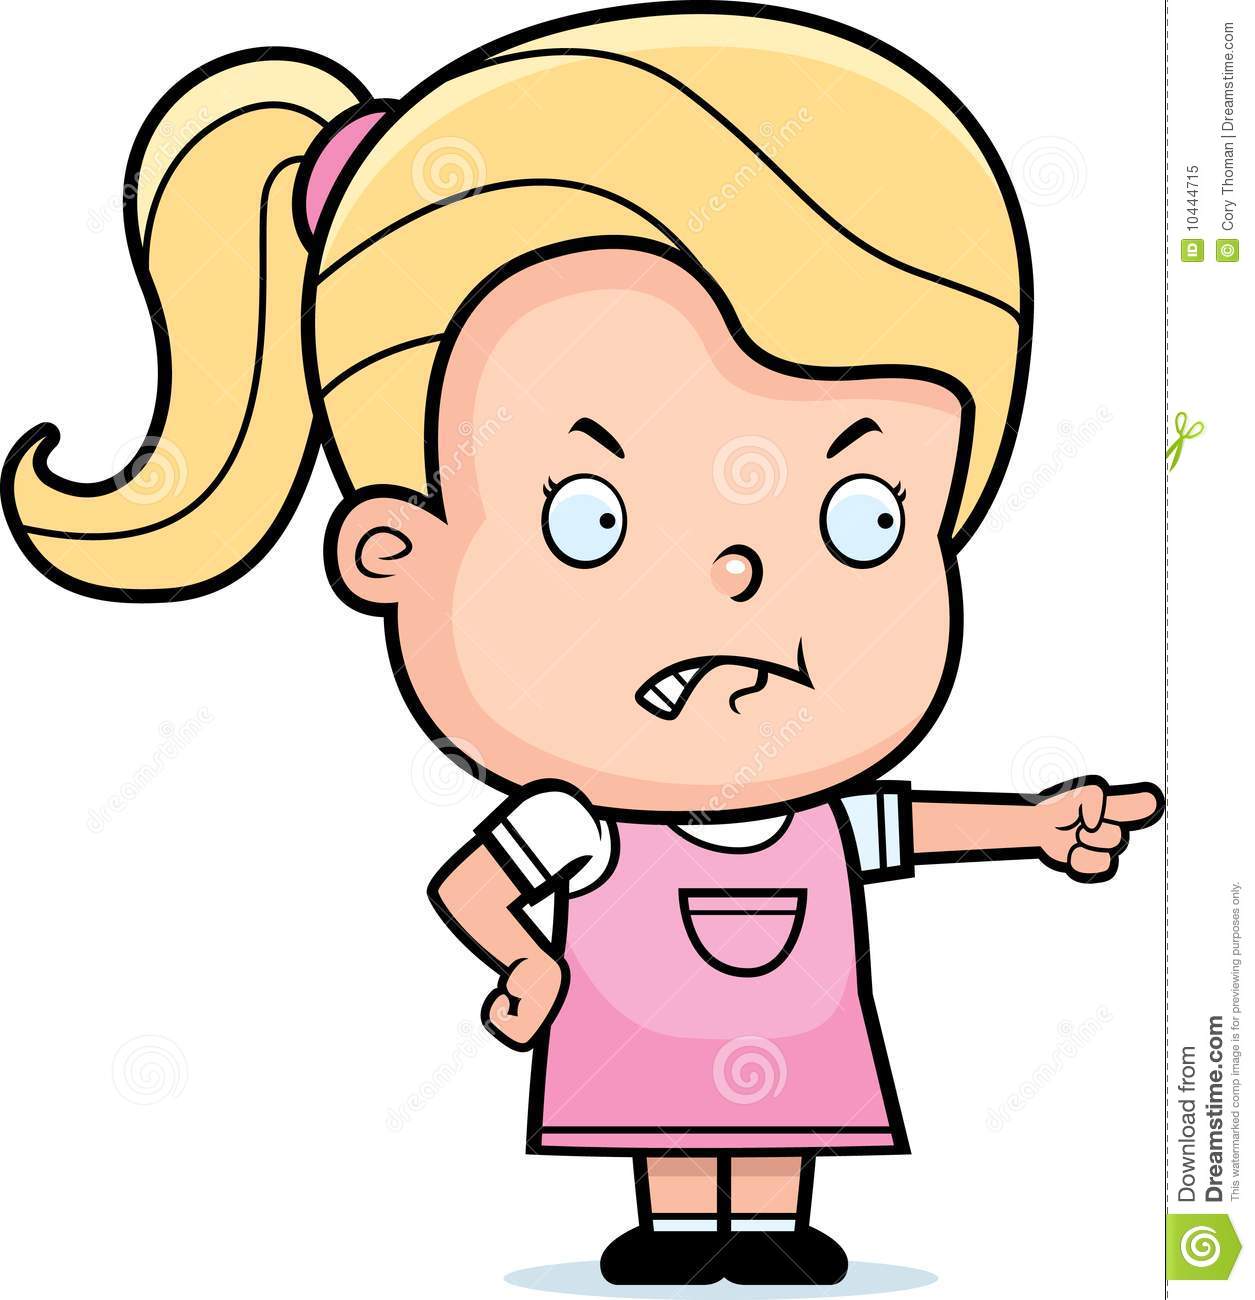 anger clipart mad